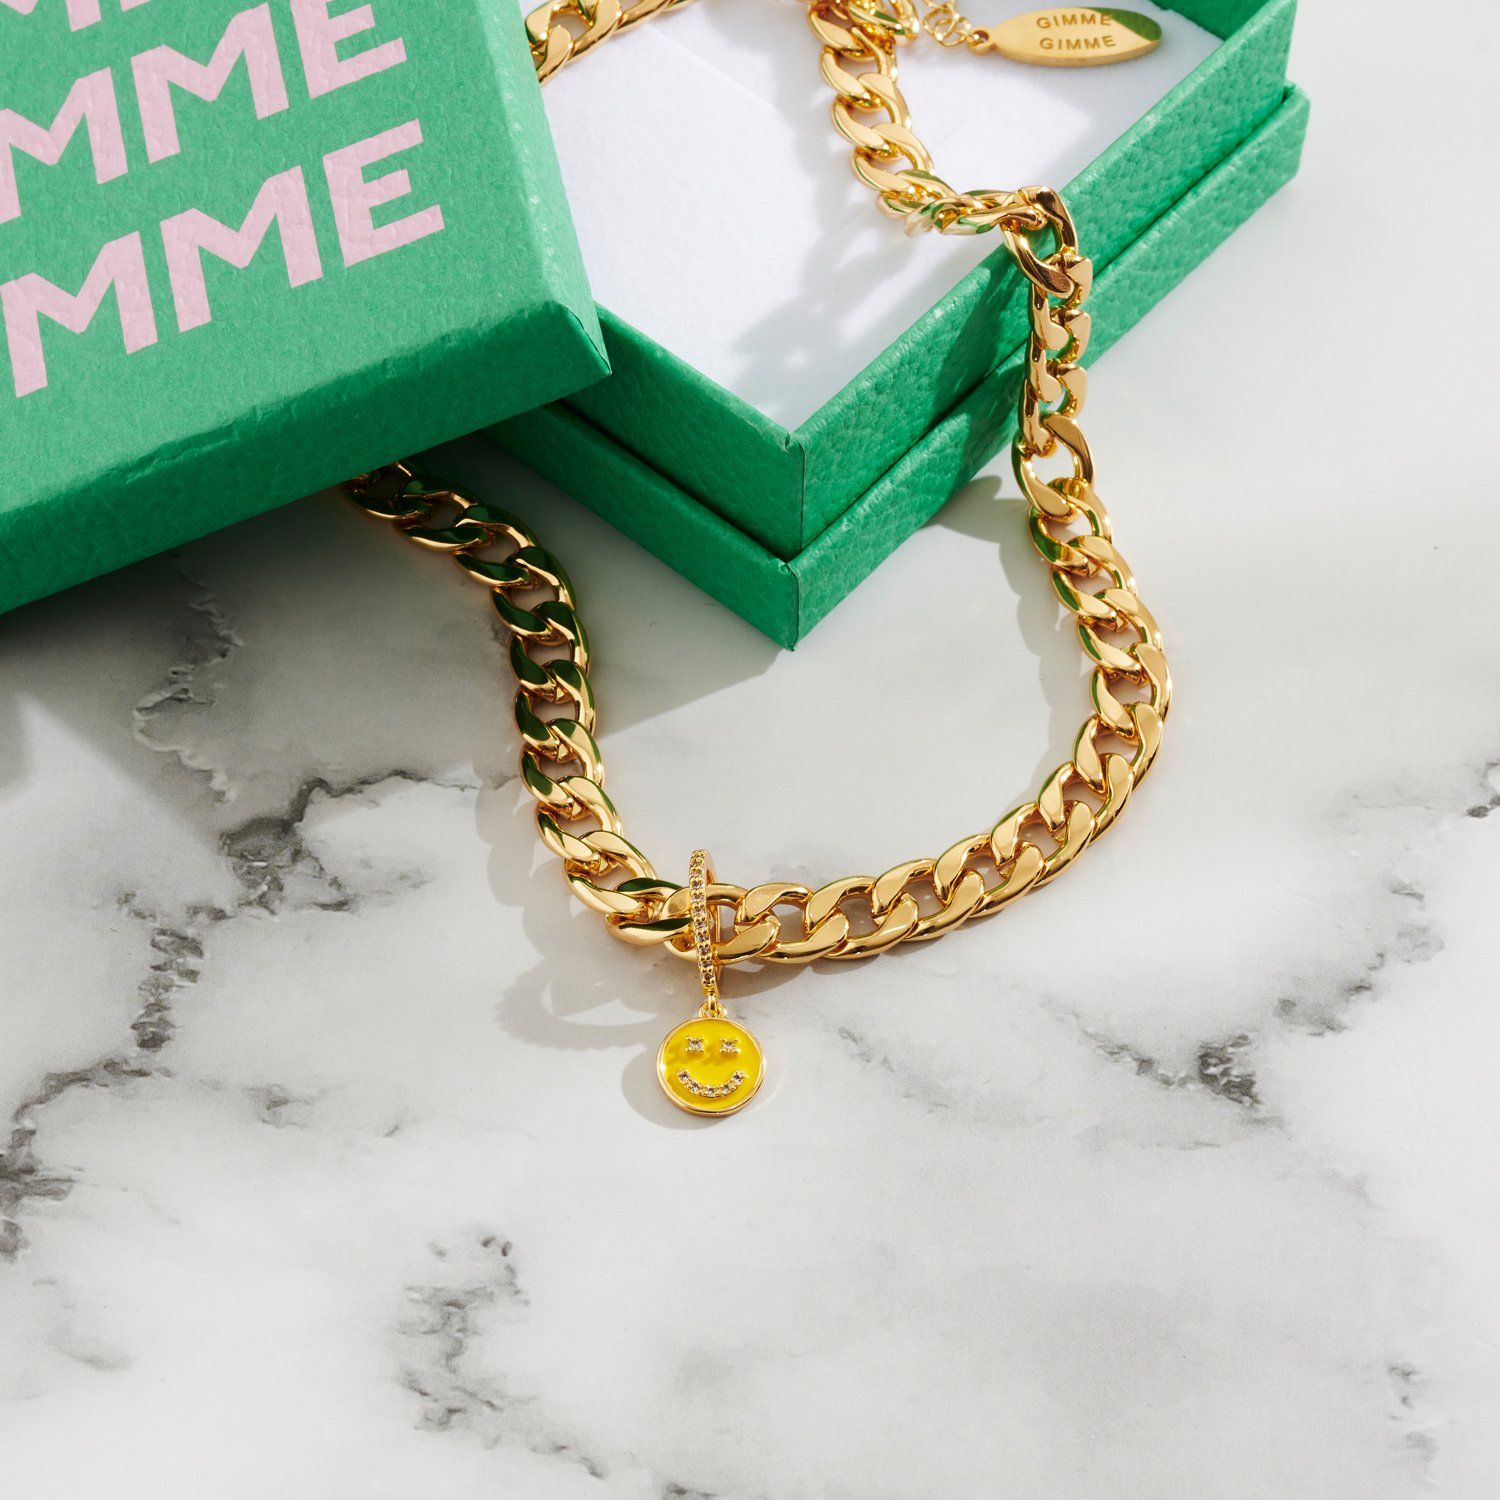 Lifestyle image of chunky gold chain necklace sitting in a green box with smiley face charm.